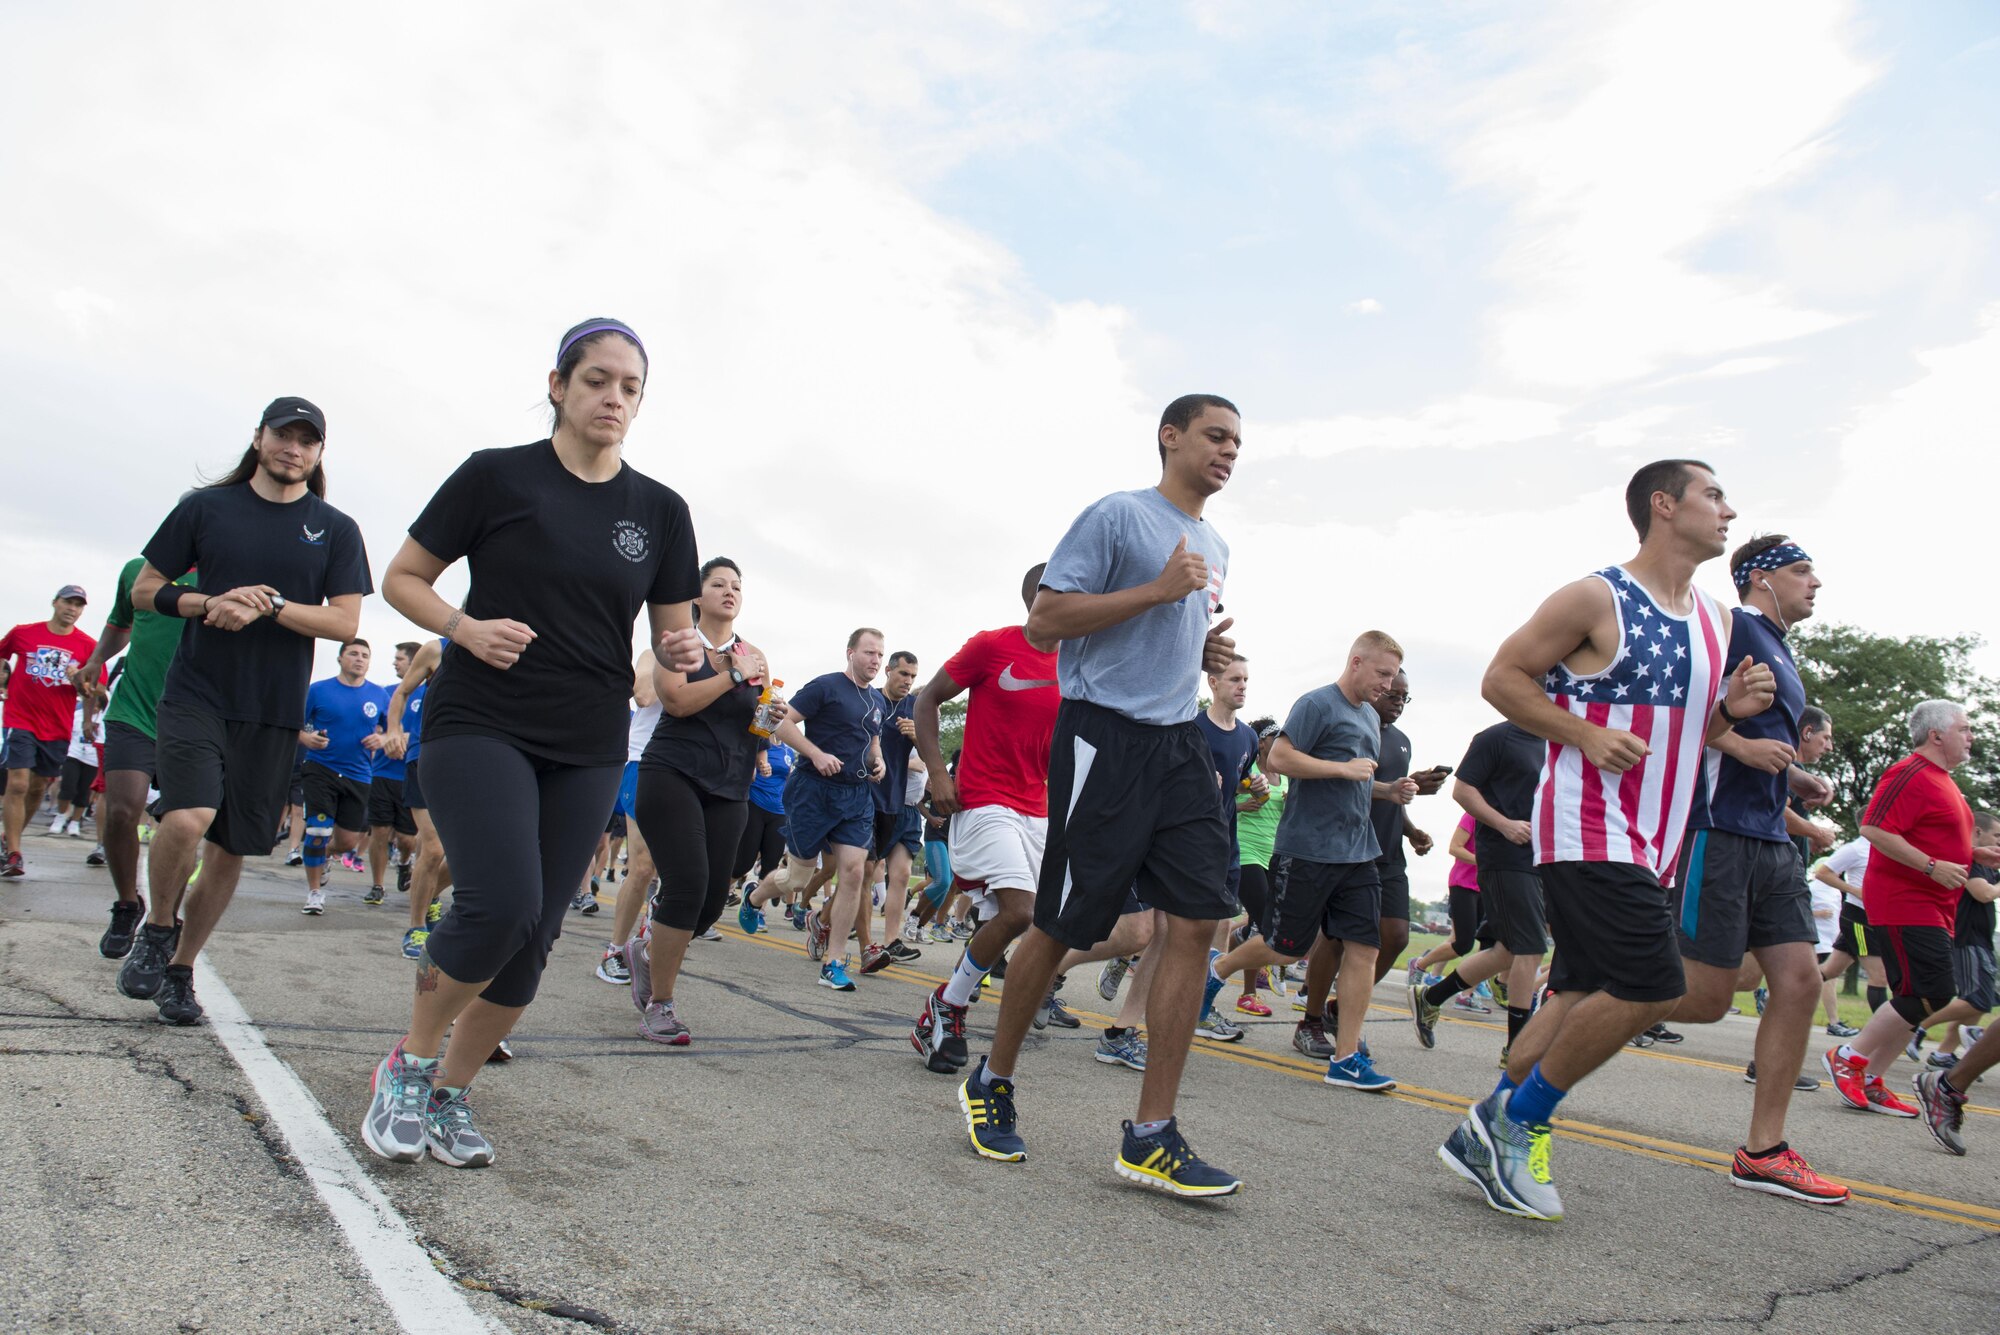 Team Wright-Patt employees run during the Run for the Fallen at Wright-Patterson Air Force Base, Ohio, September 9, 2016.  The Run for the Fallen provides an opportunity to remember and honor those who lost their lives and recognize those who continue to defend the nation. (U.S. Air Force photo by Michelle Gigante)